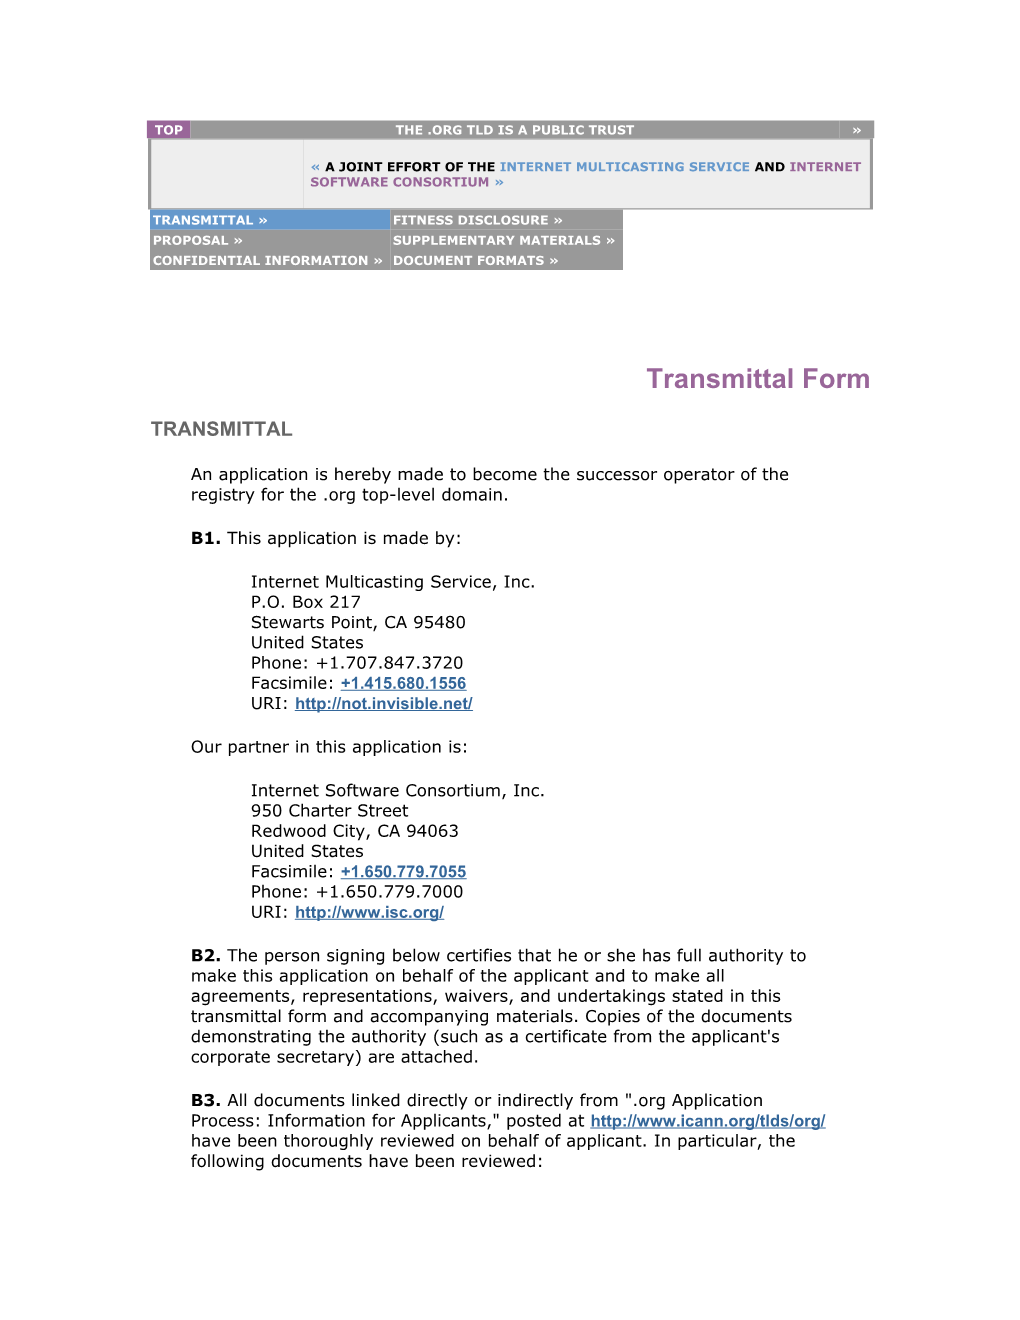 IMS/ISC: .Org Application Transmittal Form